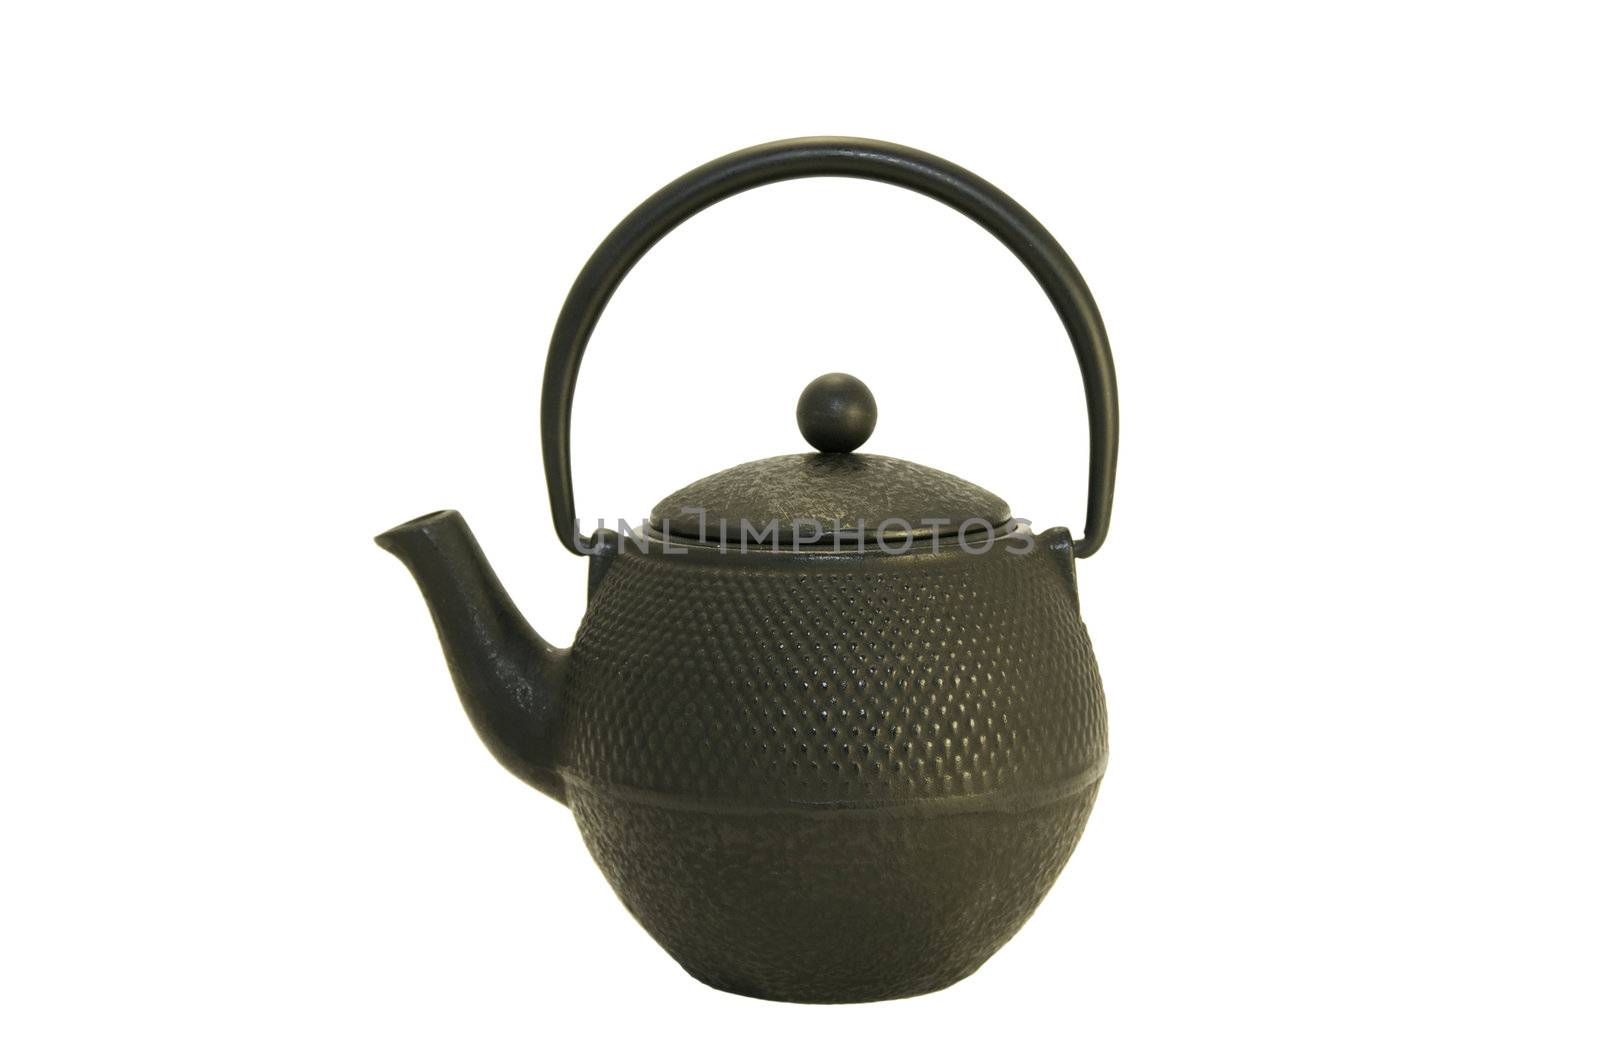 kettle for boiling water on a white background